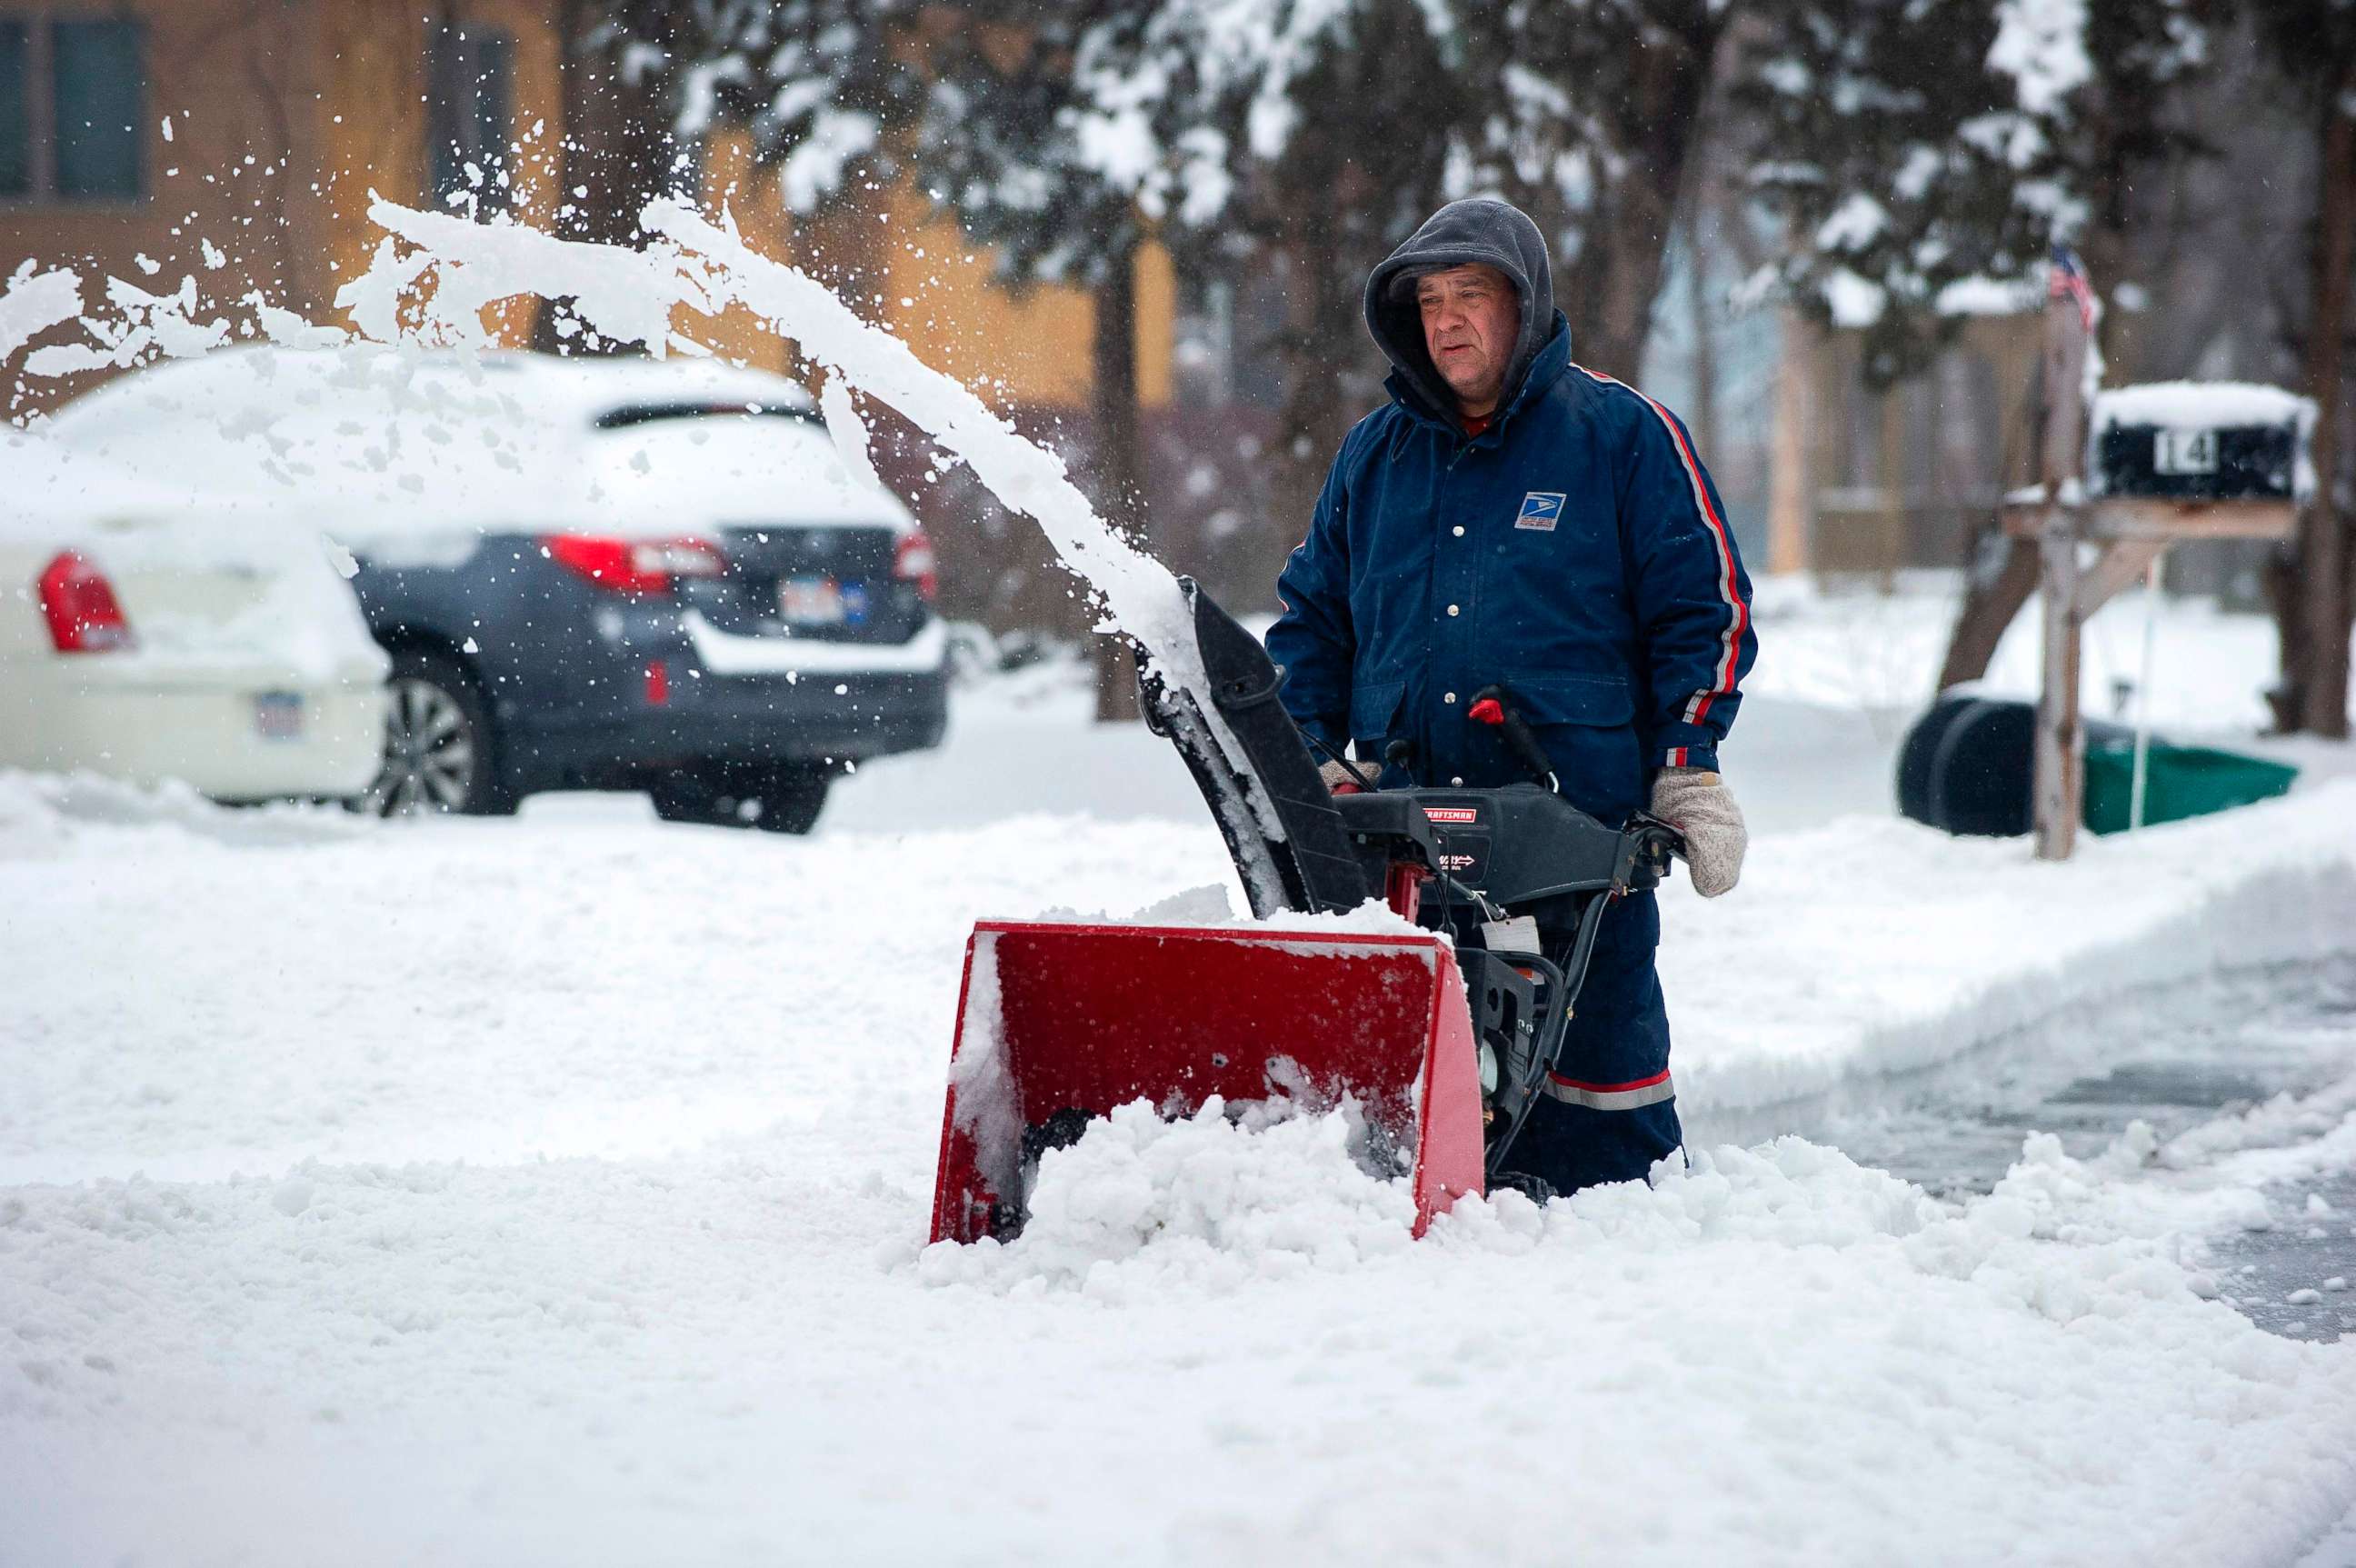 PHOTO: A man in a US Postal Uniform uses a snow blower to clear a street during Winter Storm Harper in Saugus, Mass., Jan. 20, 2019.